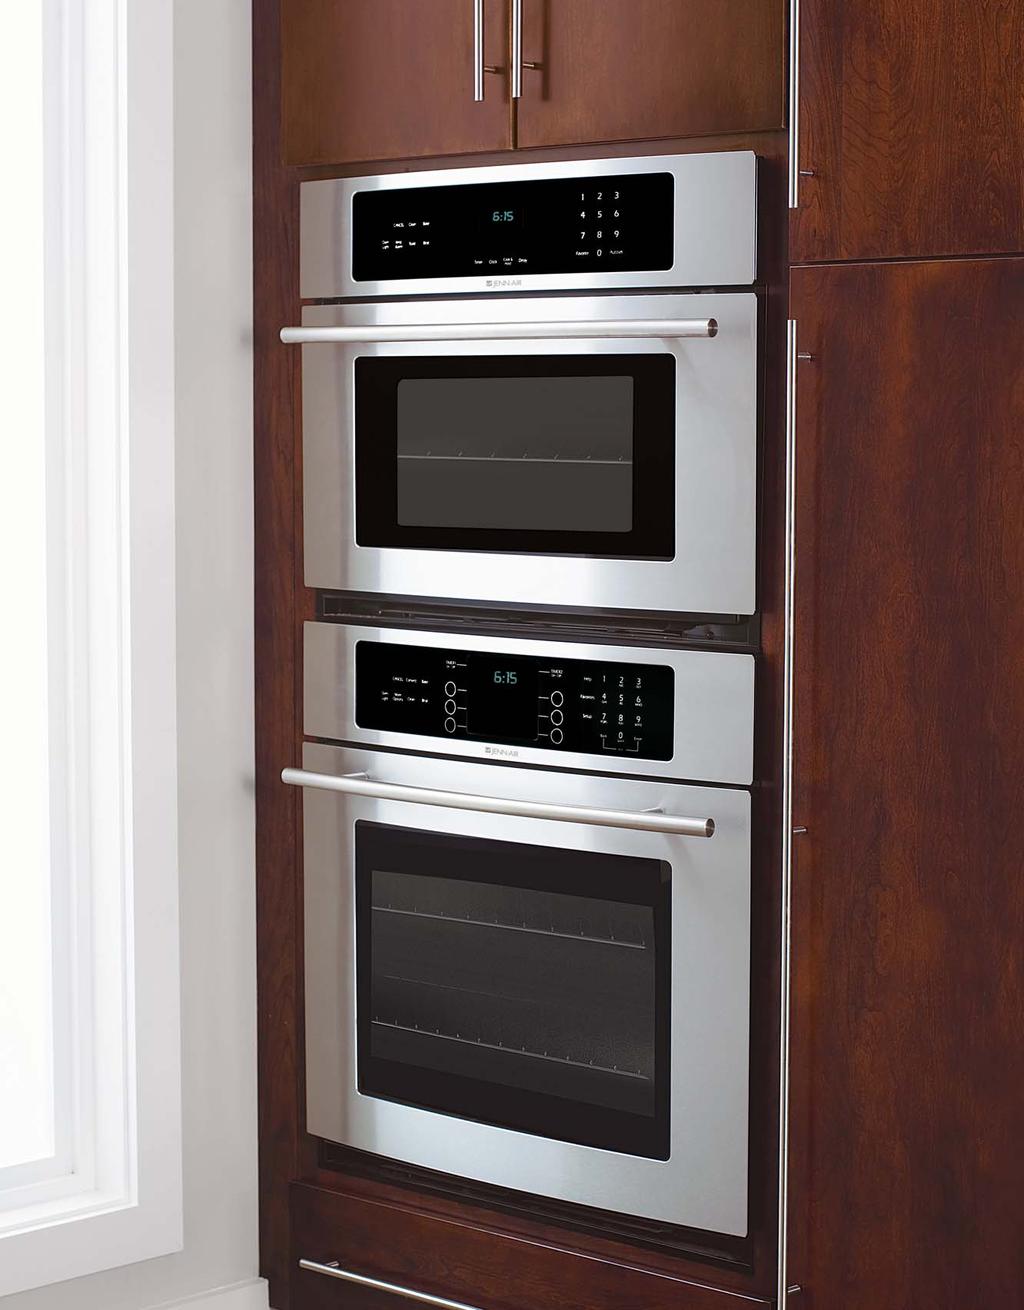 WALL OVENS SHOWN: JJW7530DDS 30" CONVENIENCE OVEN OVER